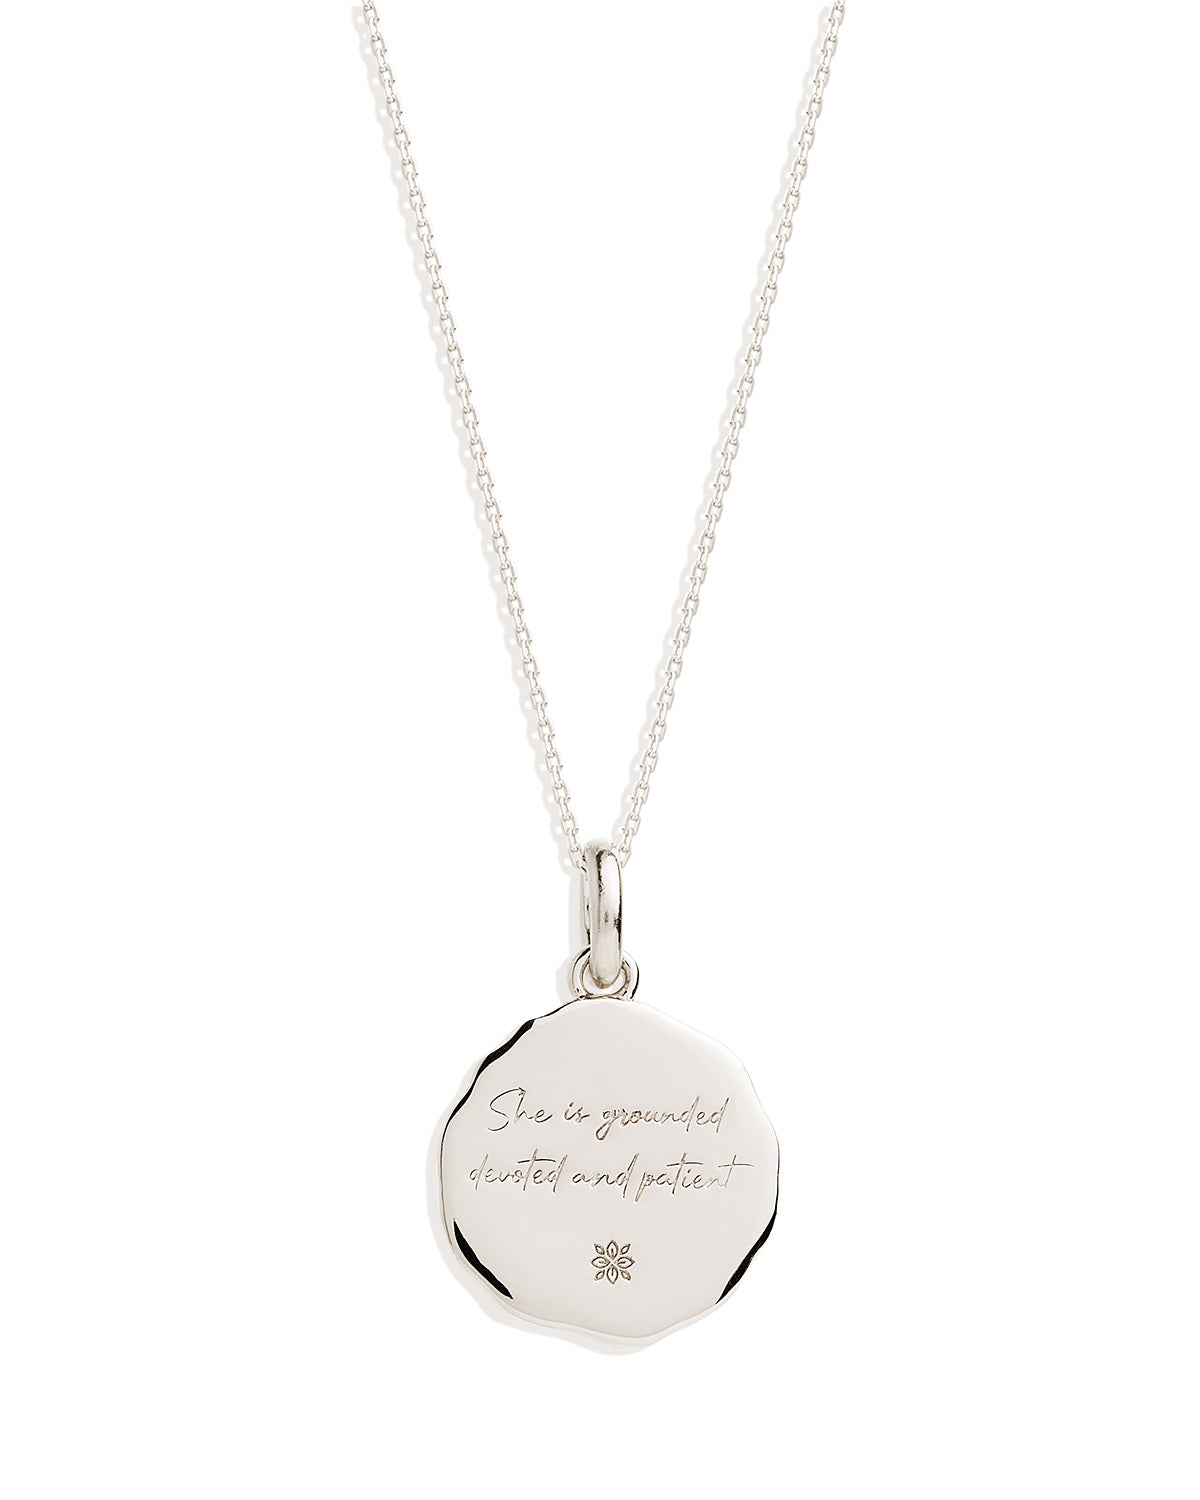 By Charlotte She Is Zodiac Necklace, Silver